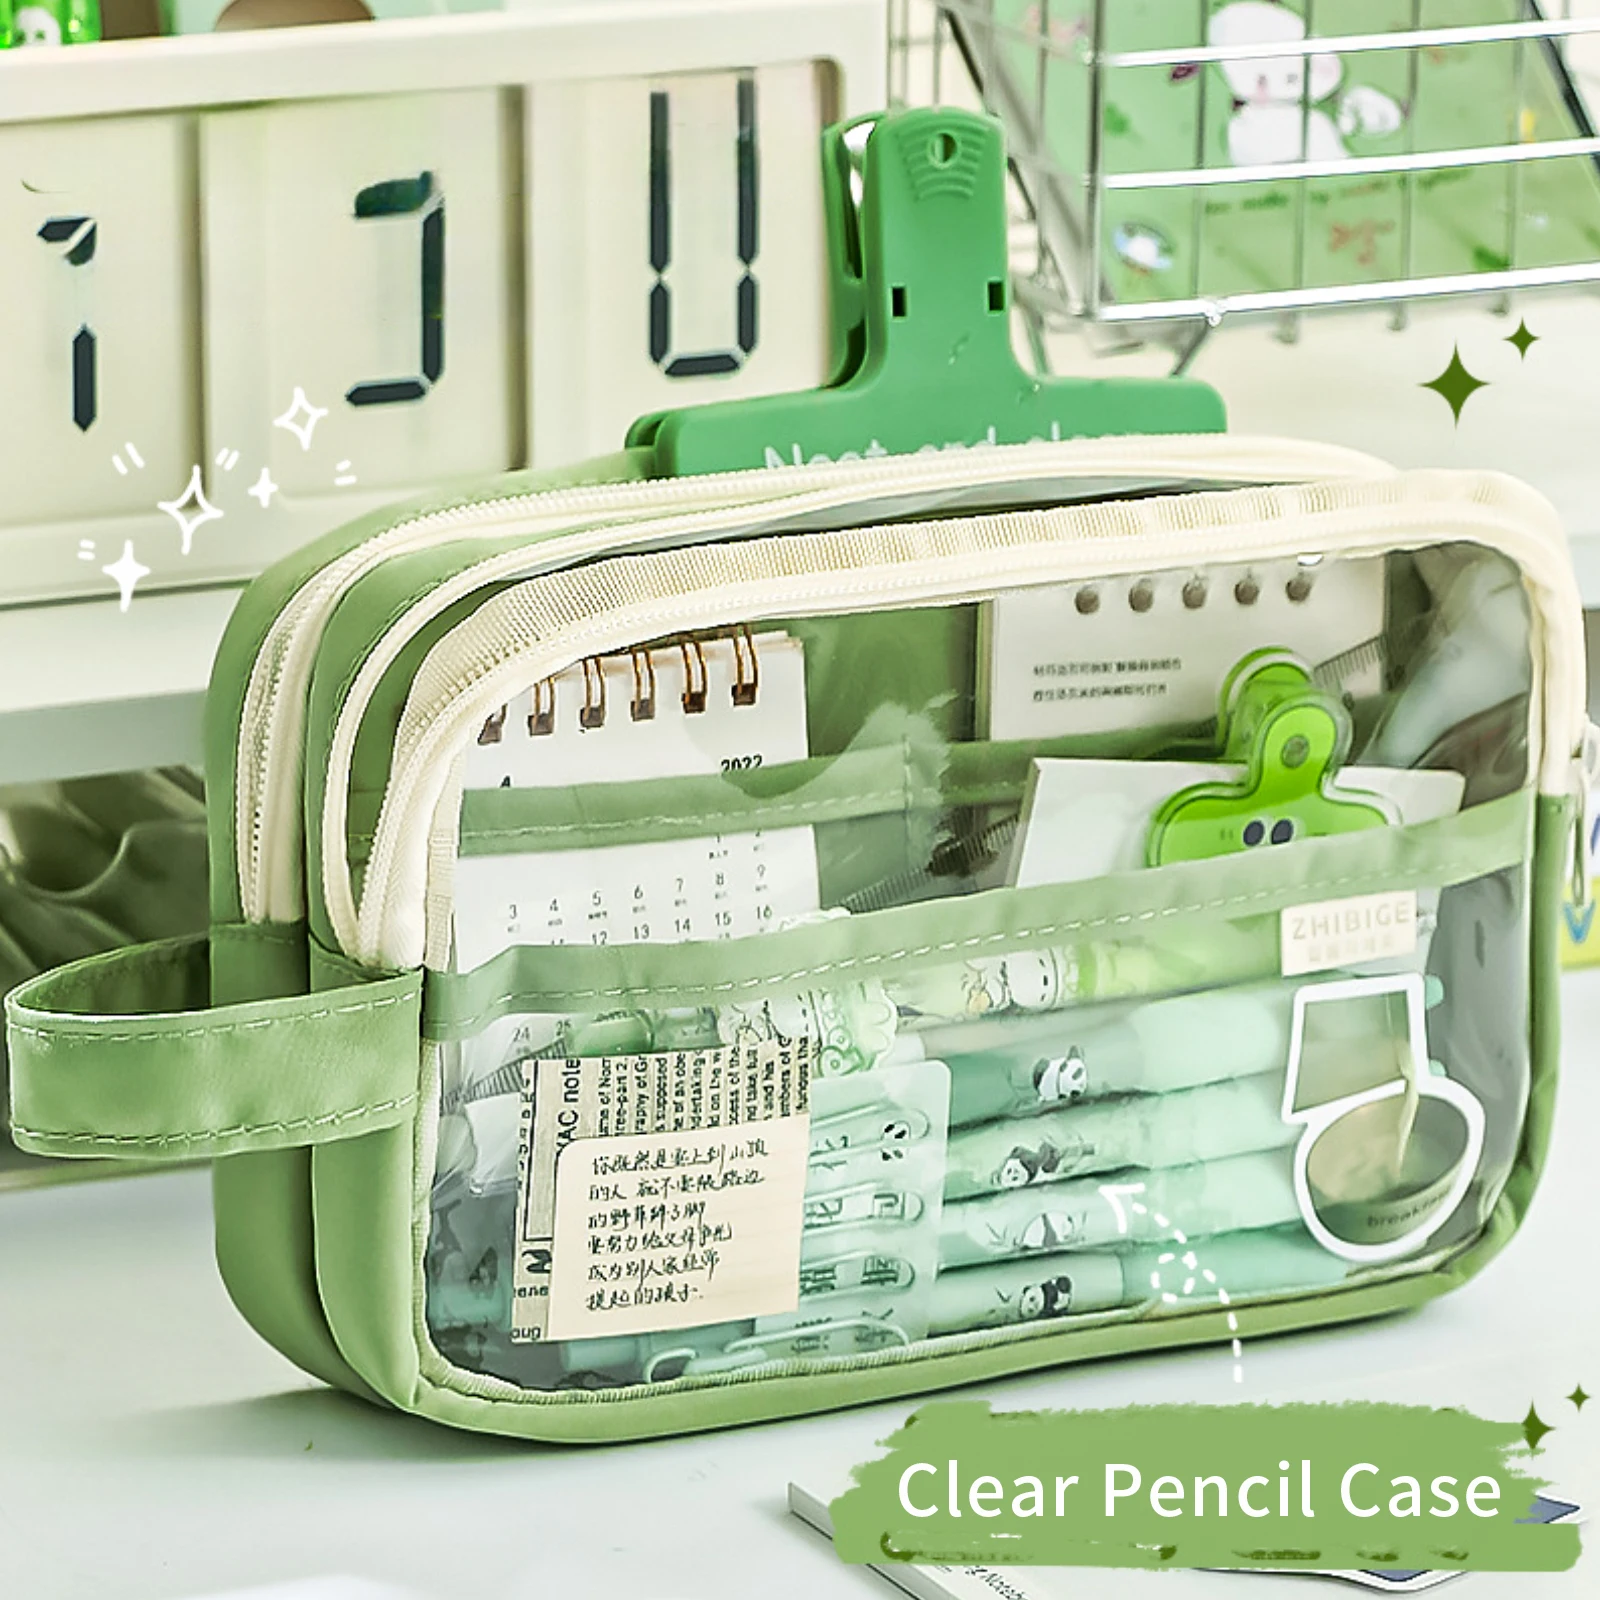 Ita Bag Pencil Case Handheld Double Layer Clear Pencil Pouch Storage Pouch For Stationery School,Office,Organizer Cosmetics